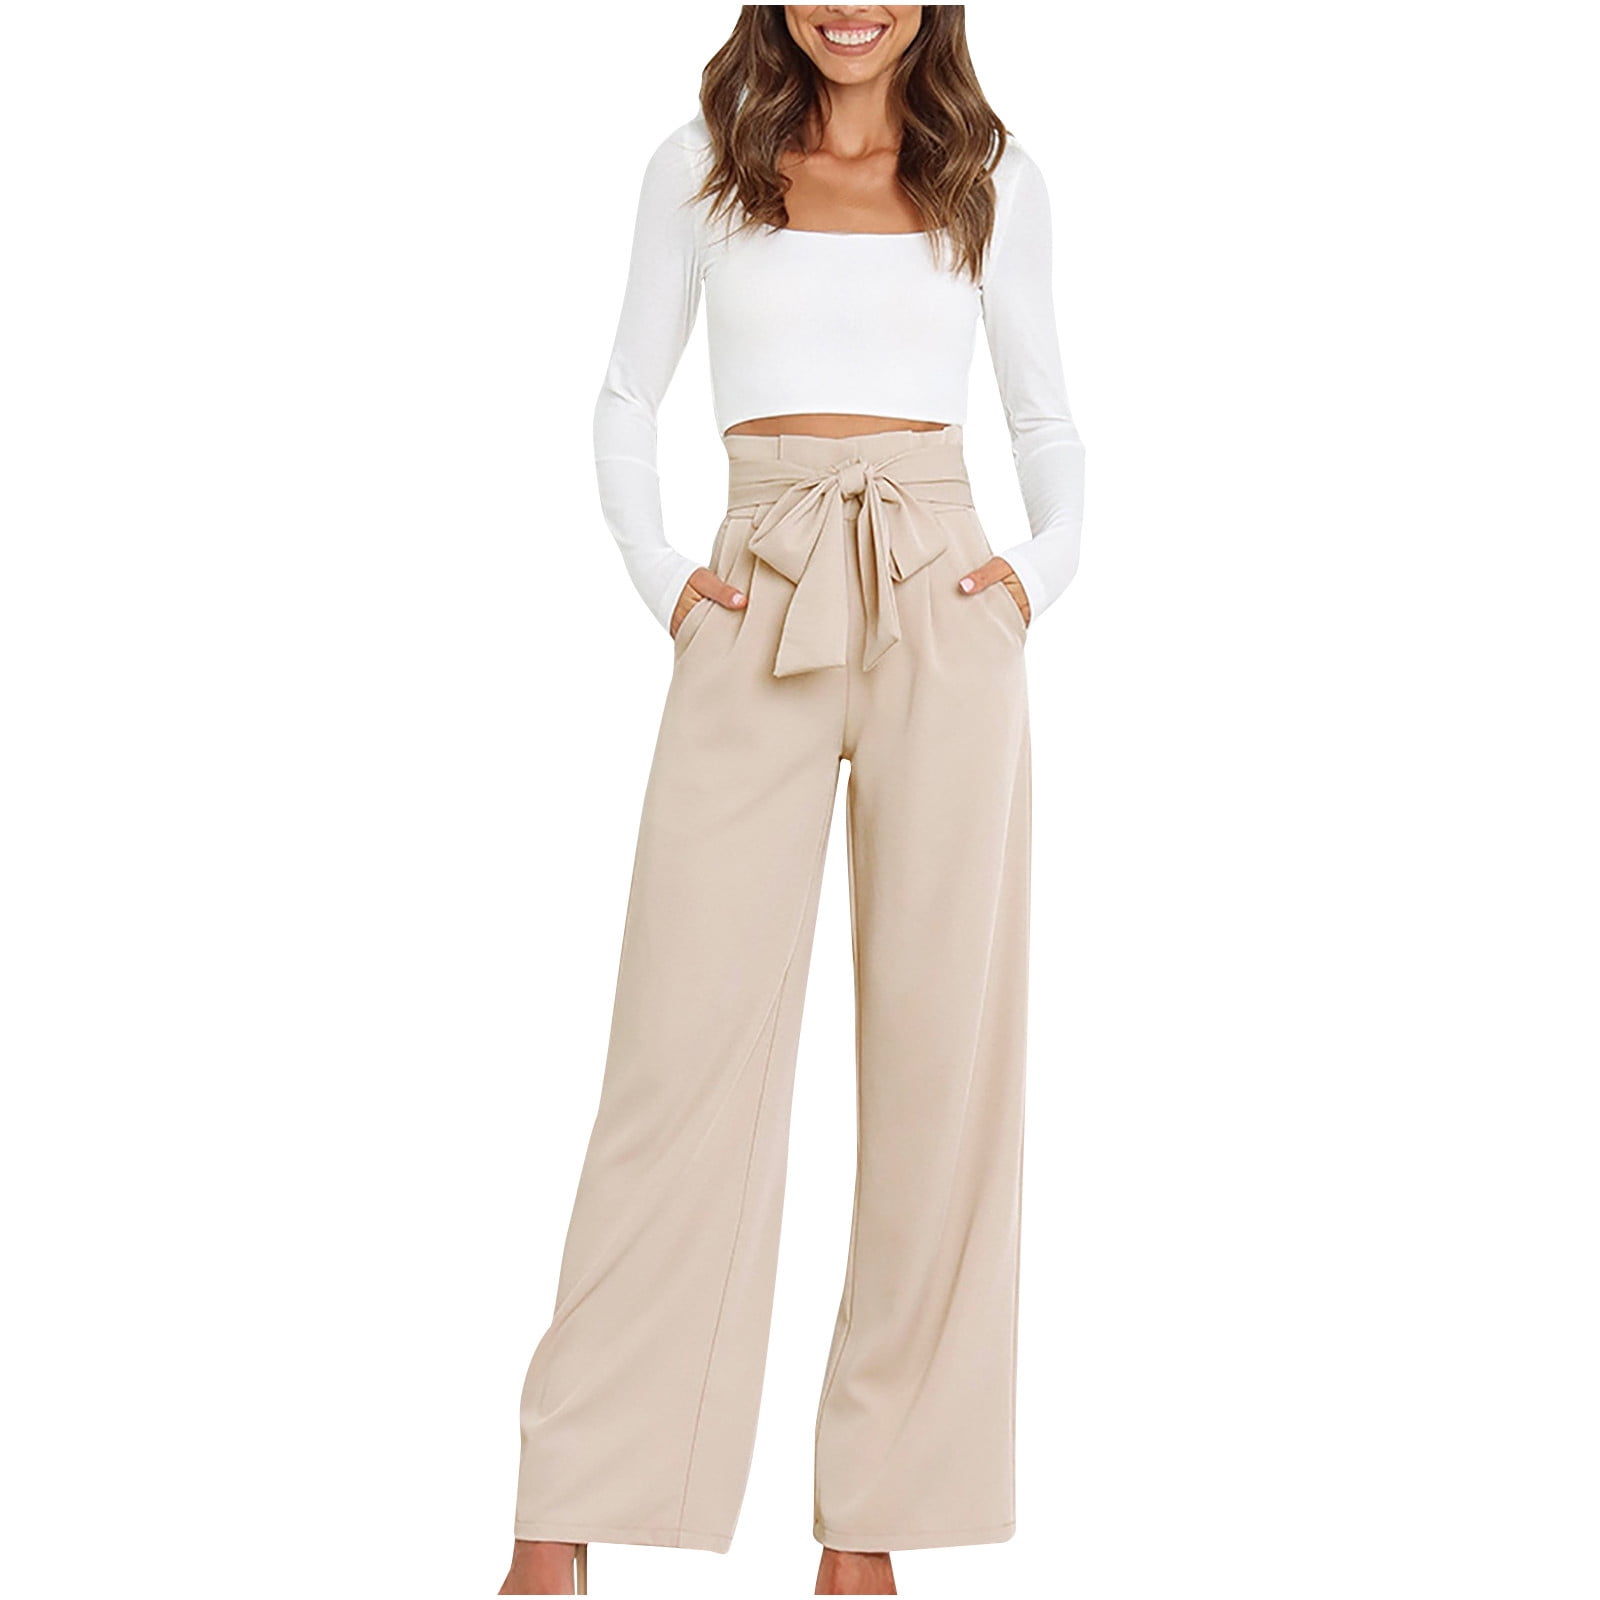 Women Plus Size Casual Loose Plus Size Palazzo Pants Wide Leg Pant Summer  Trousers Spring Clothing Fashion Streetwear XL 4XL From Lababy, $9.55